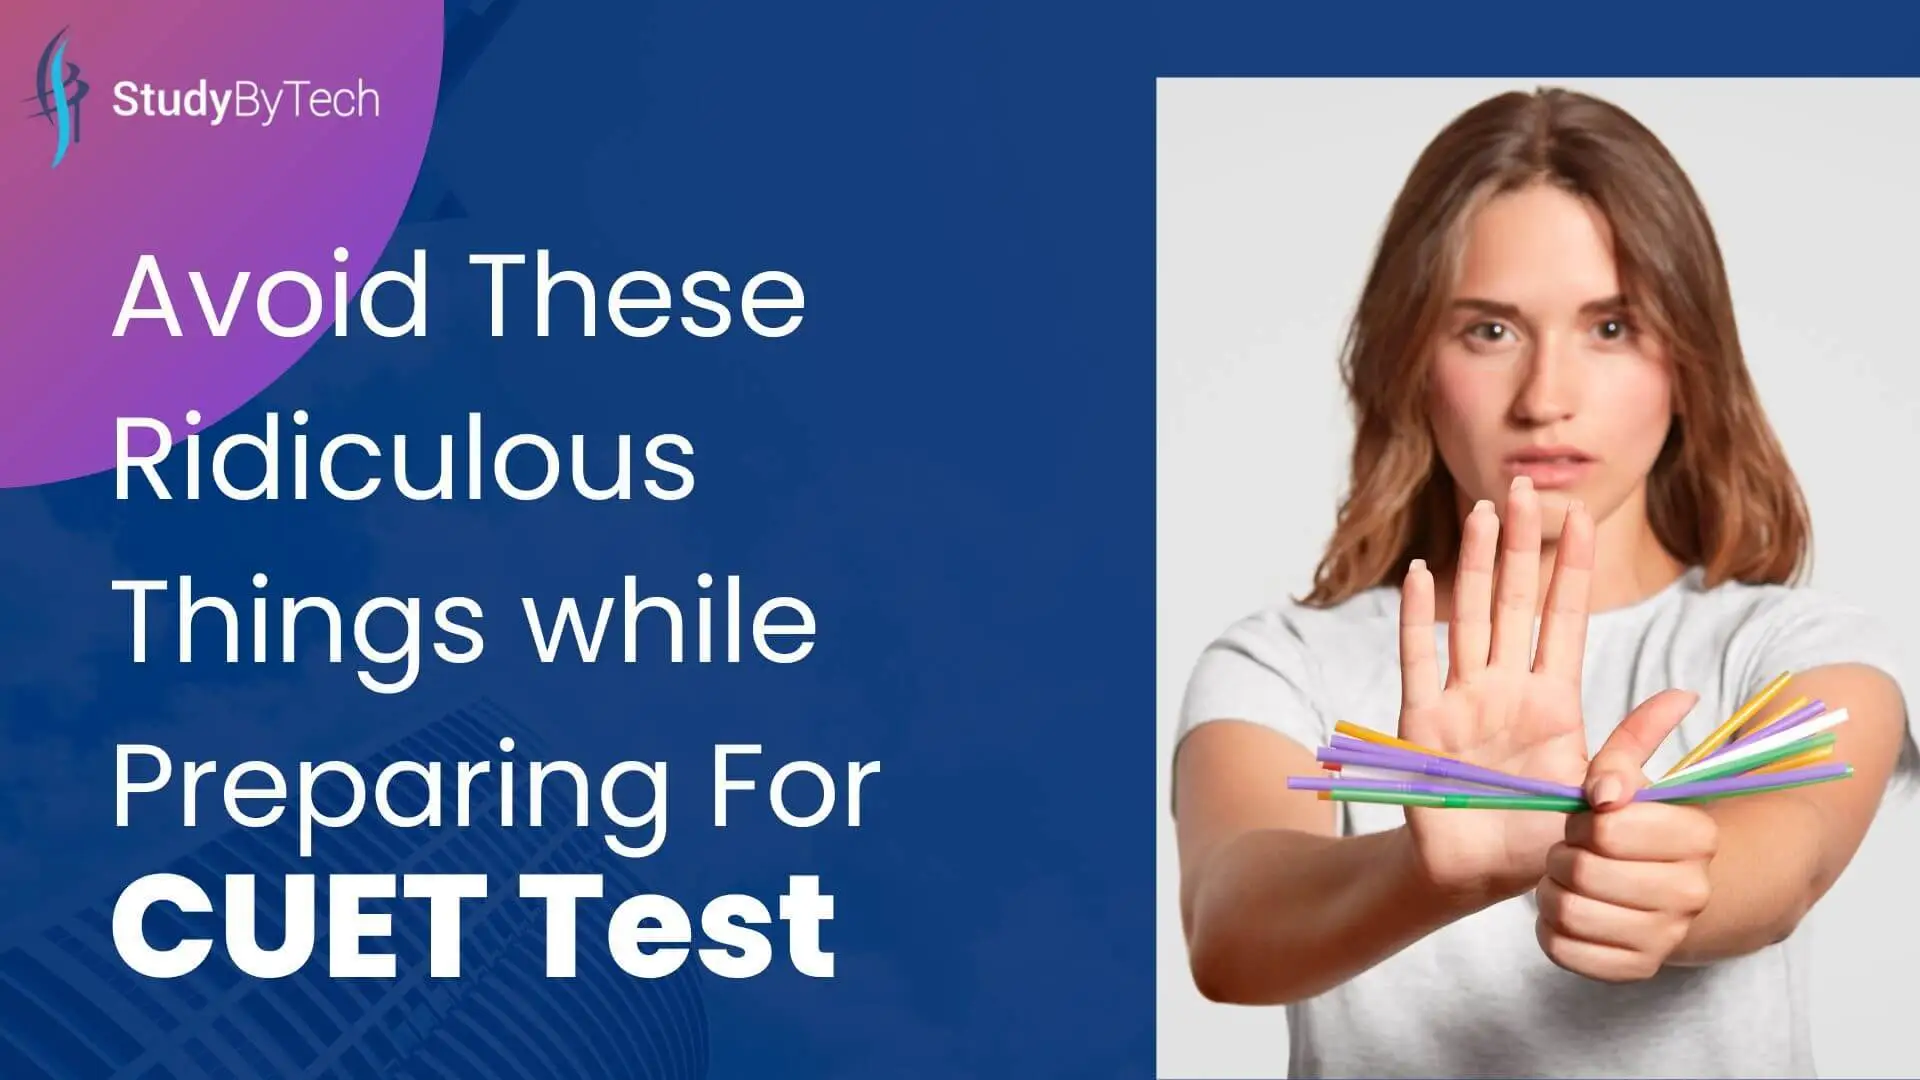 CUET TEST: Avoid These Ridiculous Things while Preparing For CUET Test